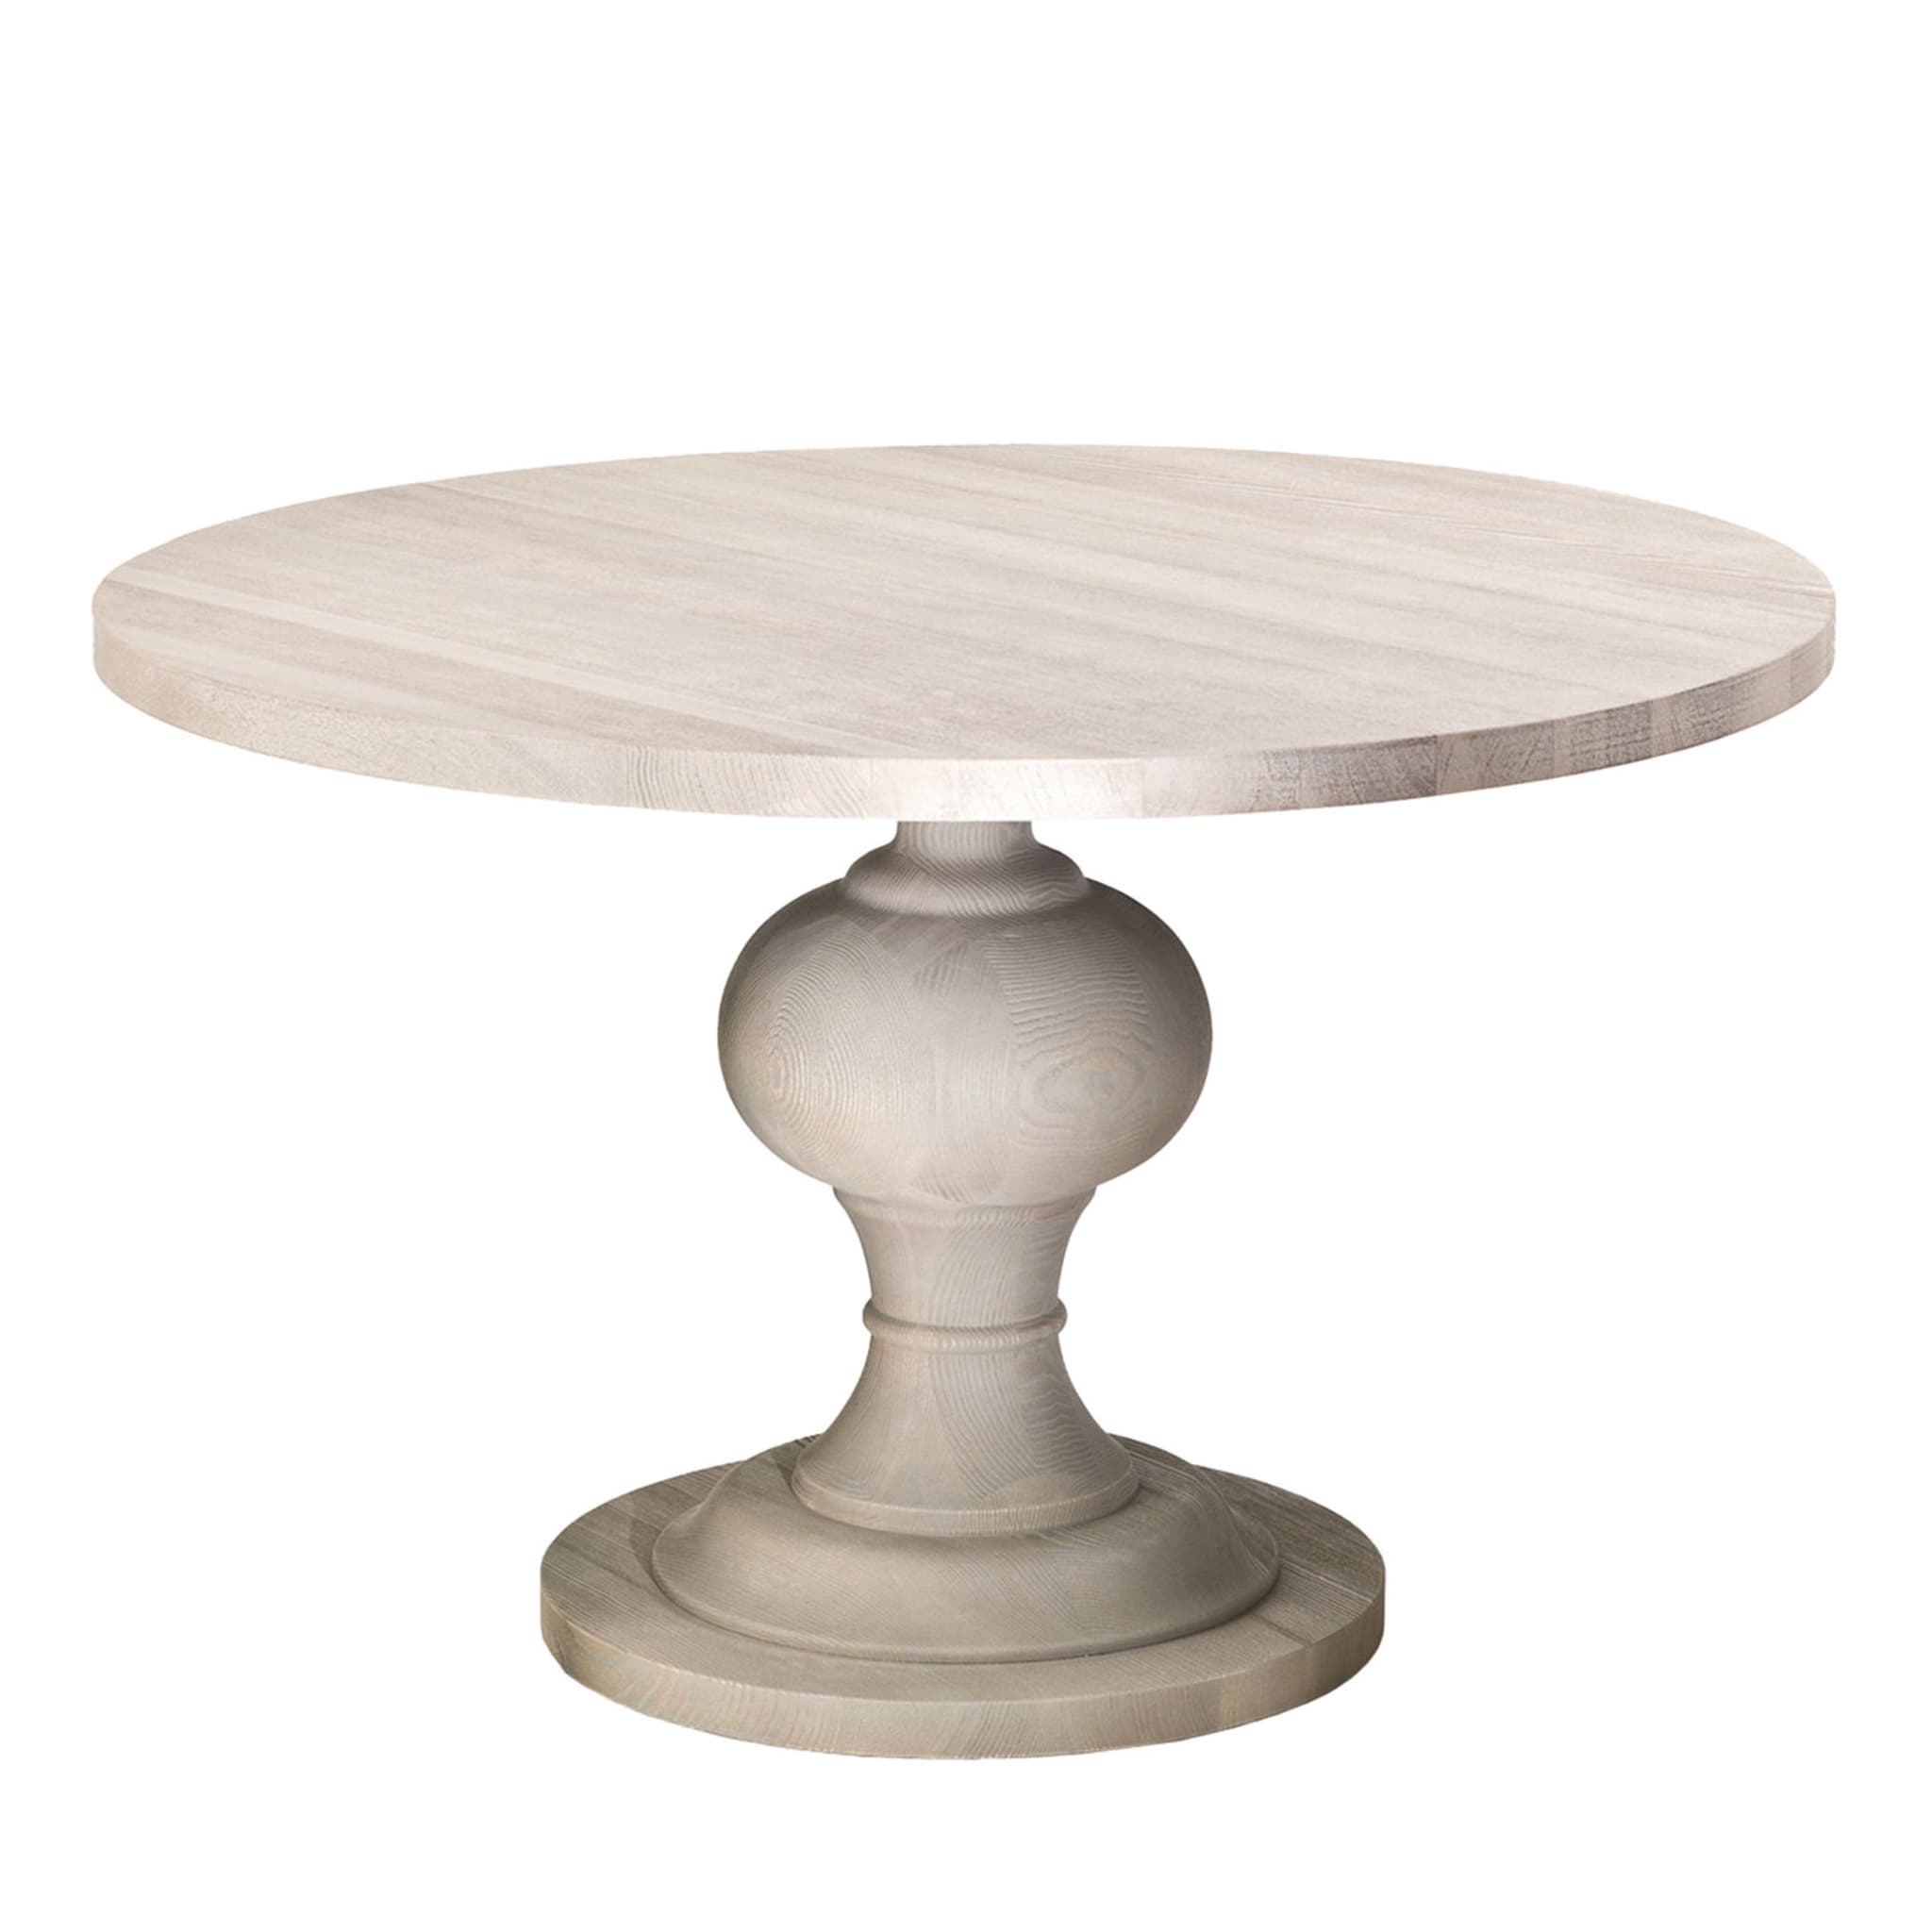 Ferne Round Outdoor Dining Table by Archer Humphryes Architects - Main view